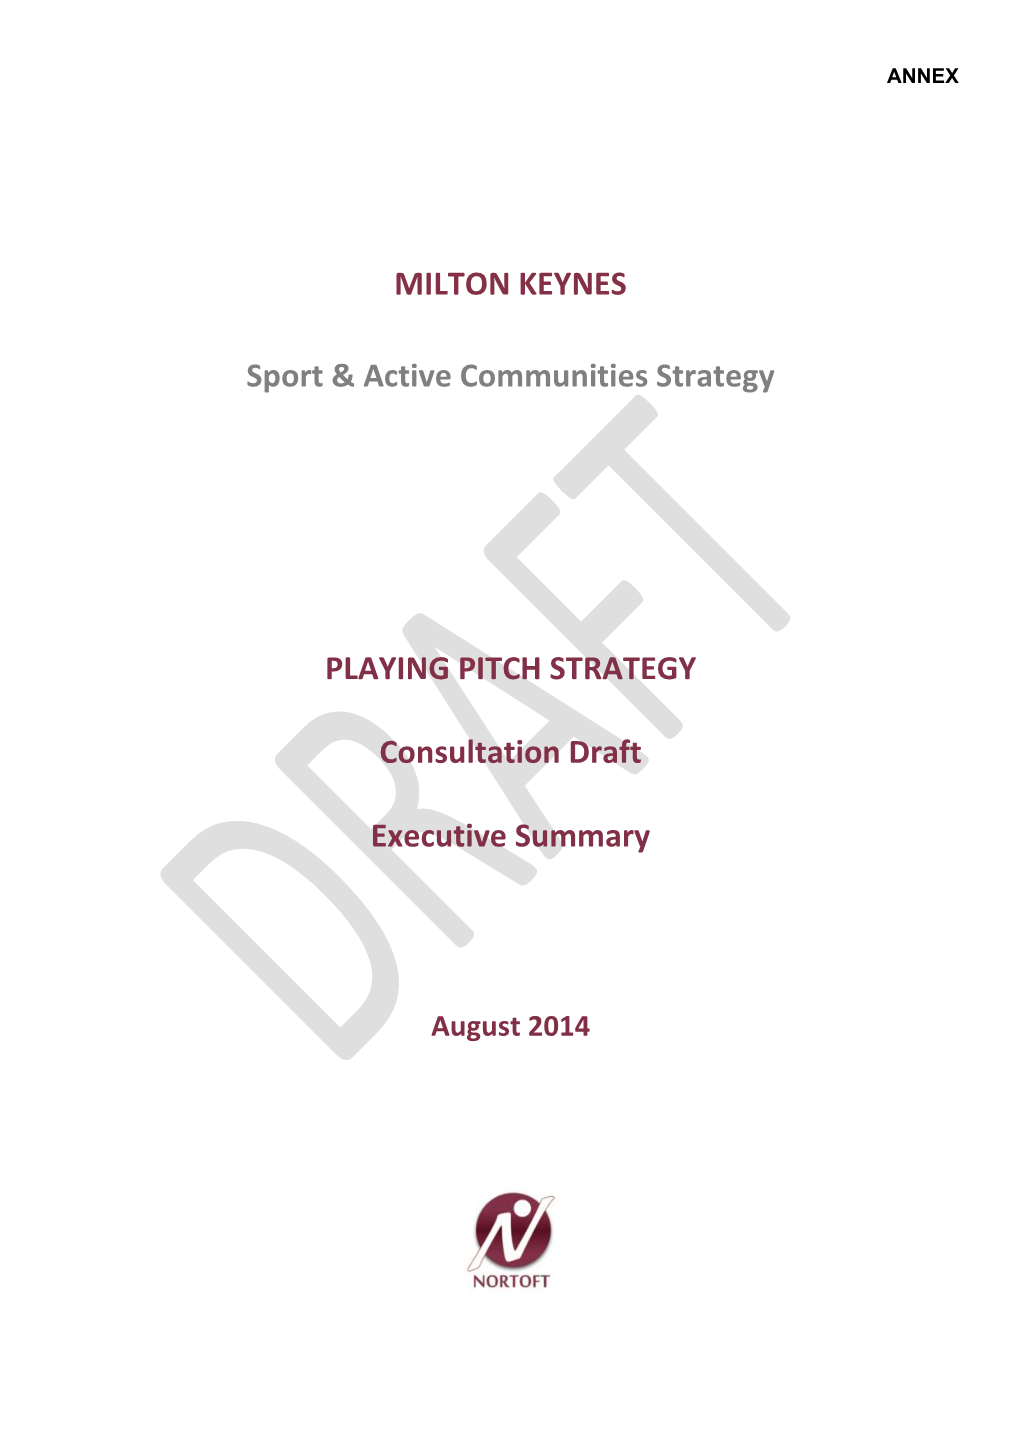 MILTON KEYNES Sport & Active Communities Strategy PLAYING PITCH STRATEGY Consultation Draft Executive Summary